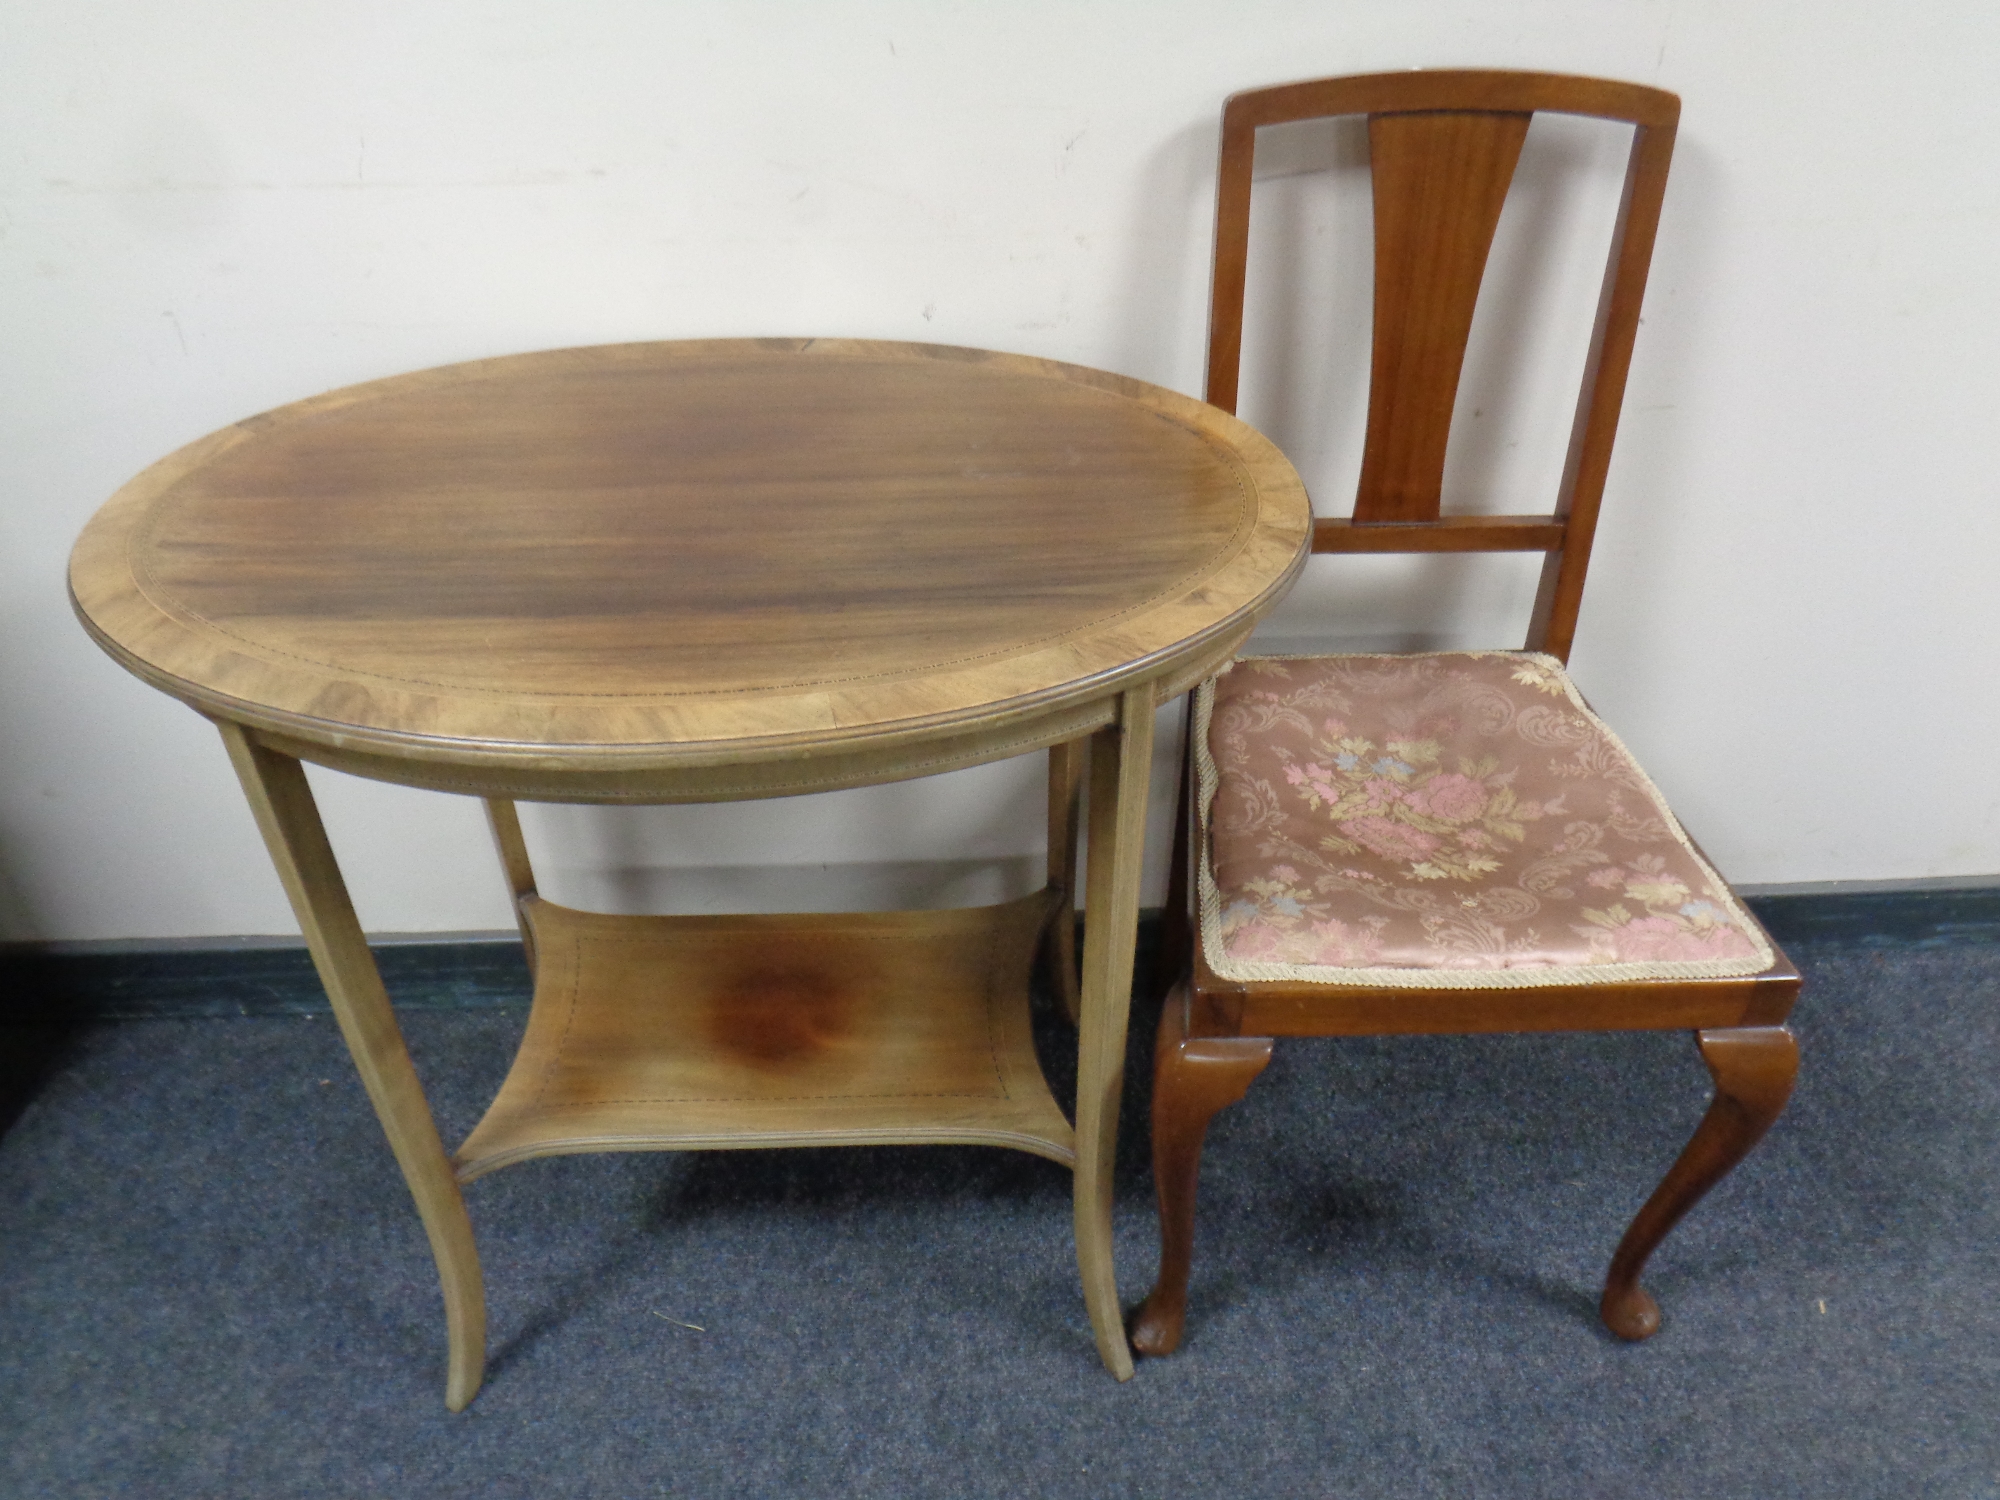 An Edwardian inlaid mahogany two-tier occasional table together with a bedroom chair